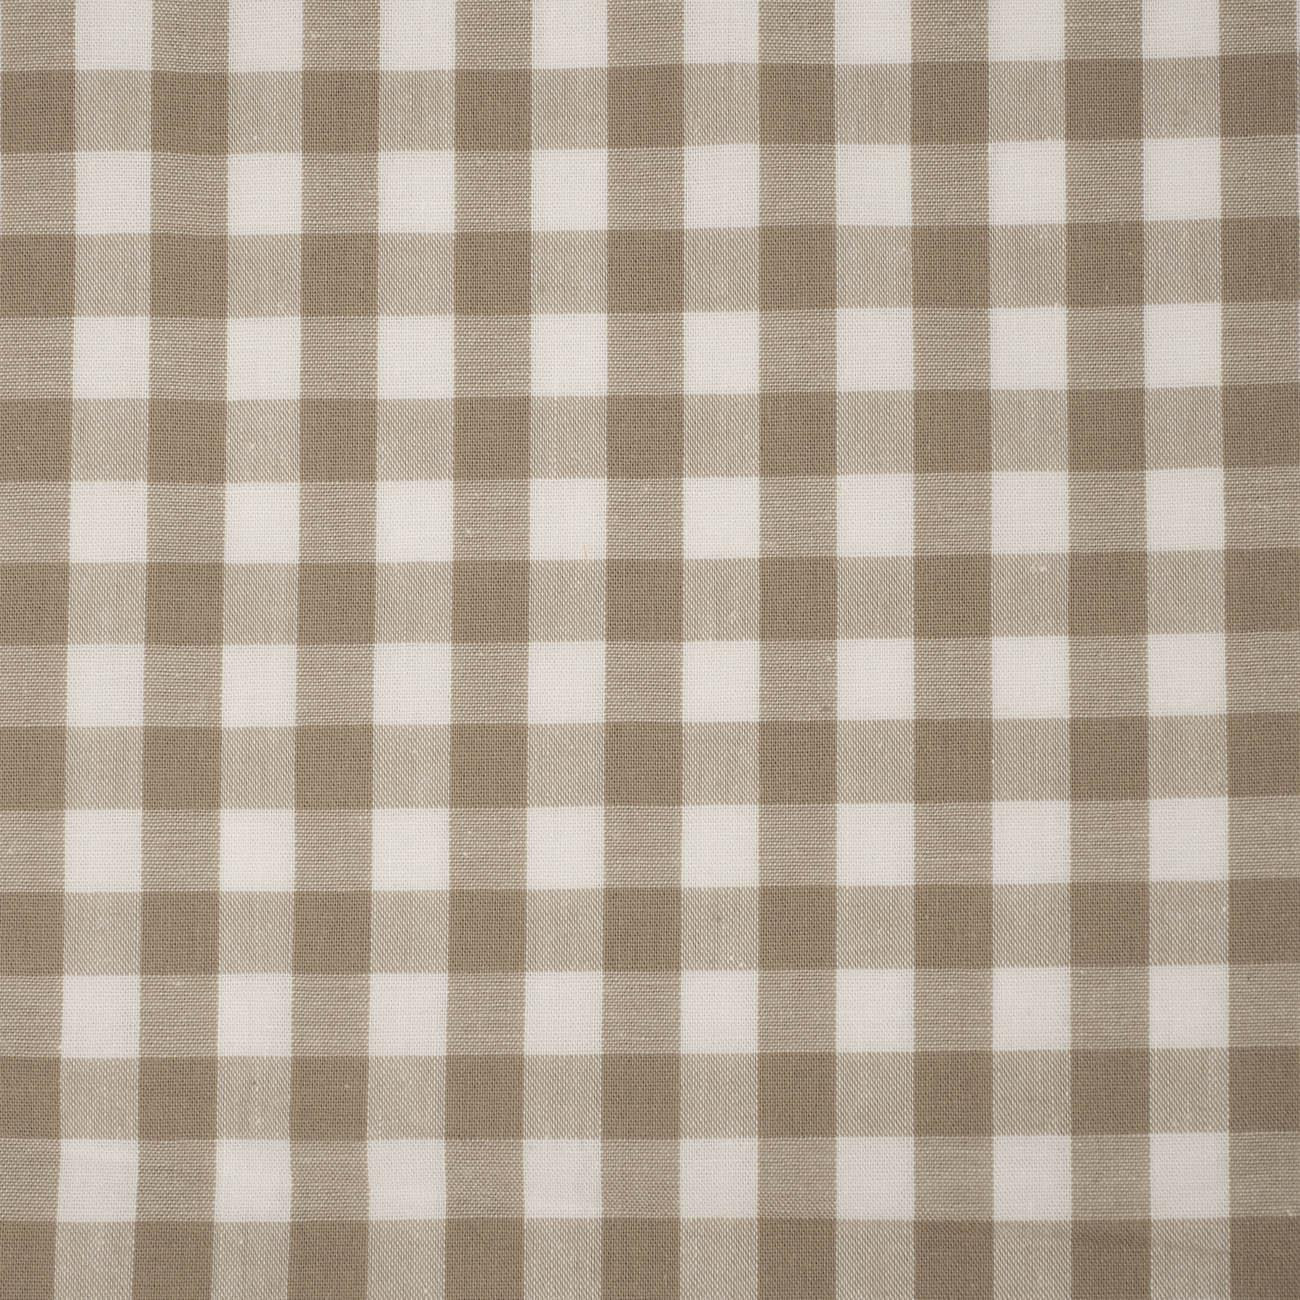 CHECKED / beige - Cotton woven fabric